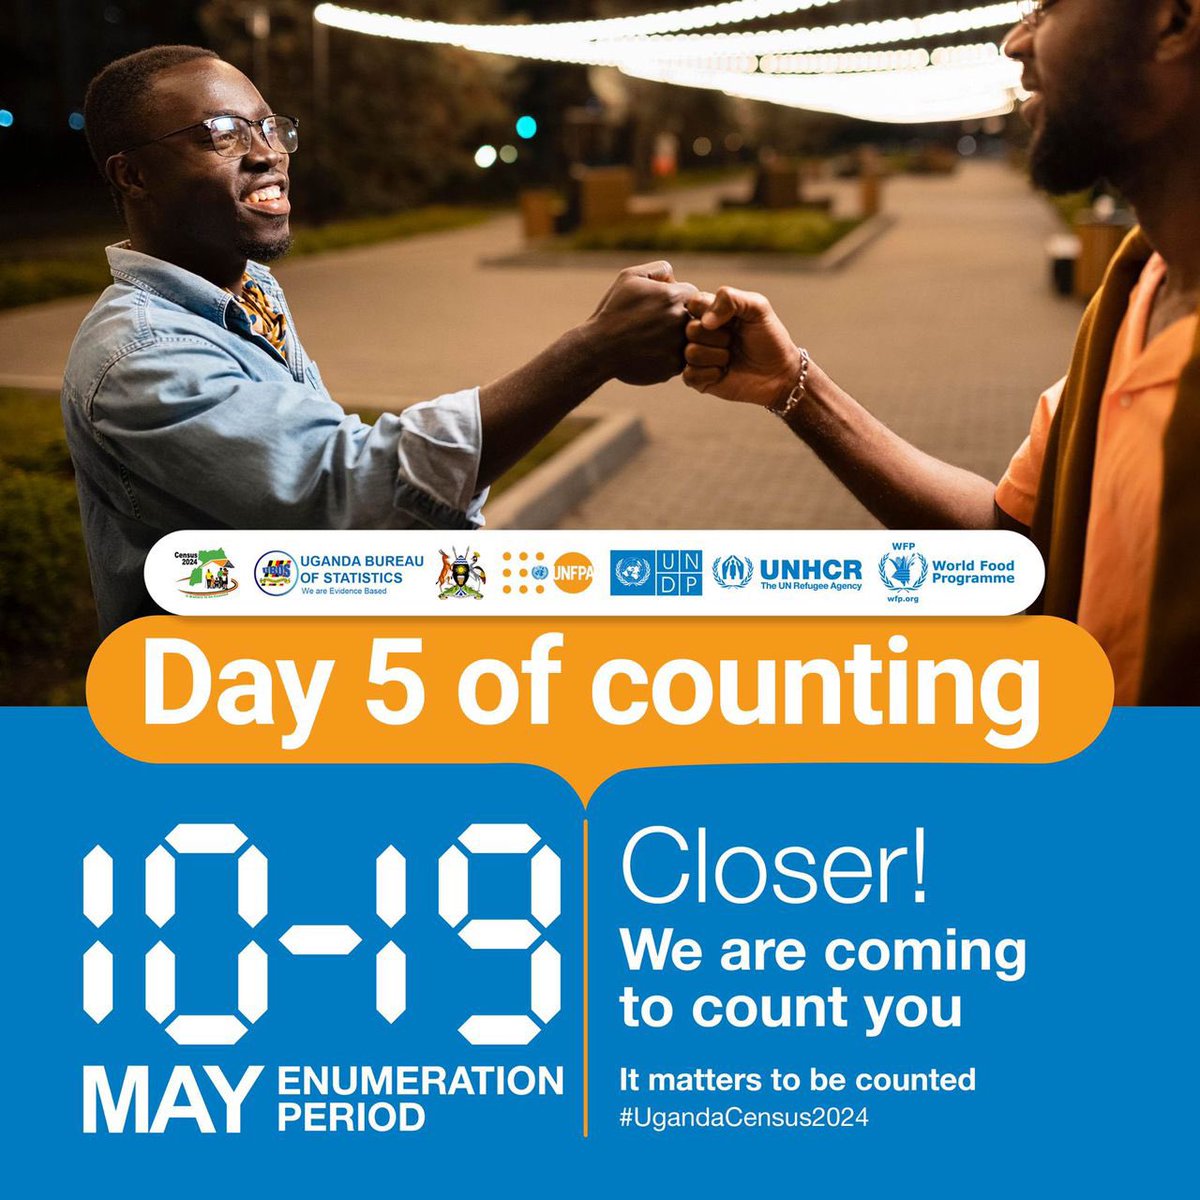 Good morning, Uganda! 🌞 Day 5 of the #UgandaCensus2024 is here, and the count is in full swing! If you haven't been visited yet, expect the enumerators to knock on your door soon. Your participation matters! #UgandaCensus2024